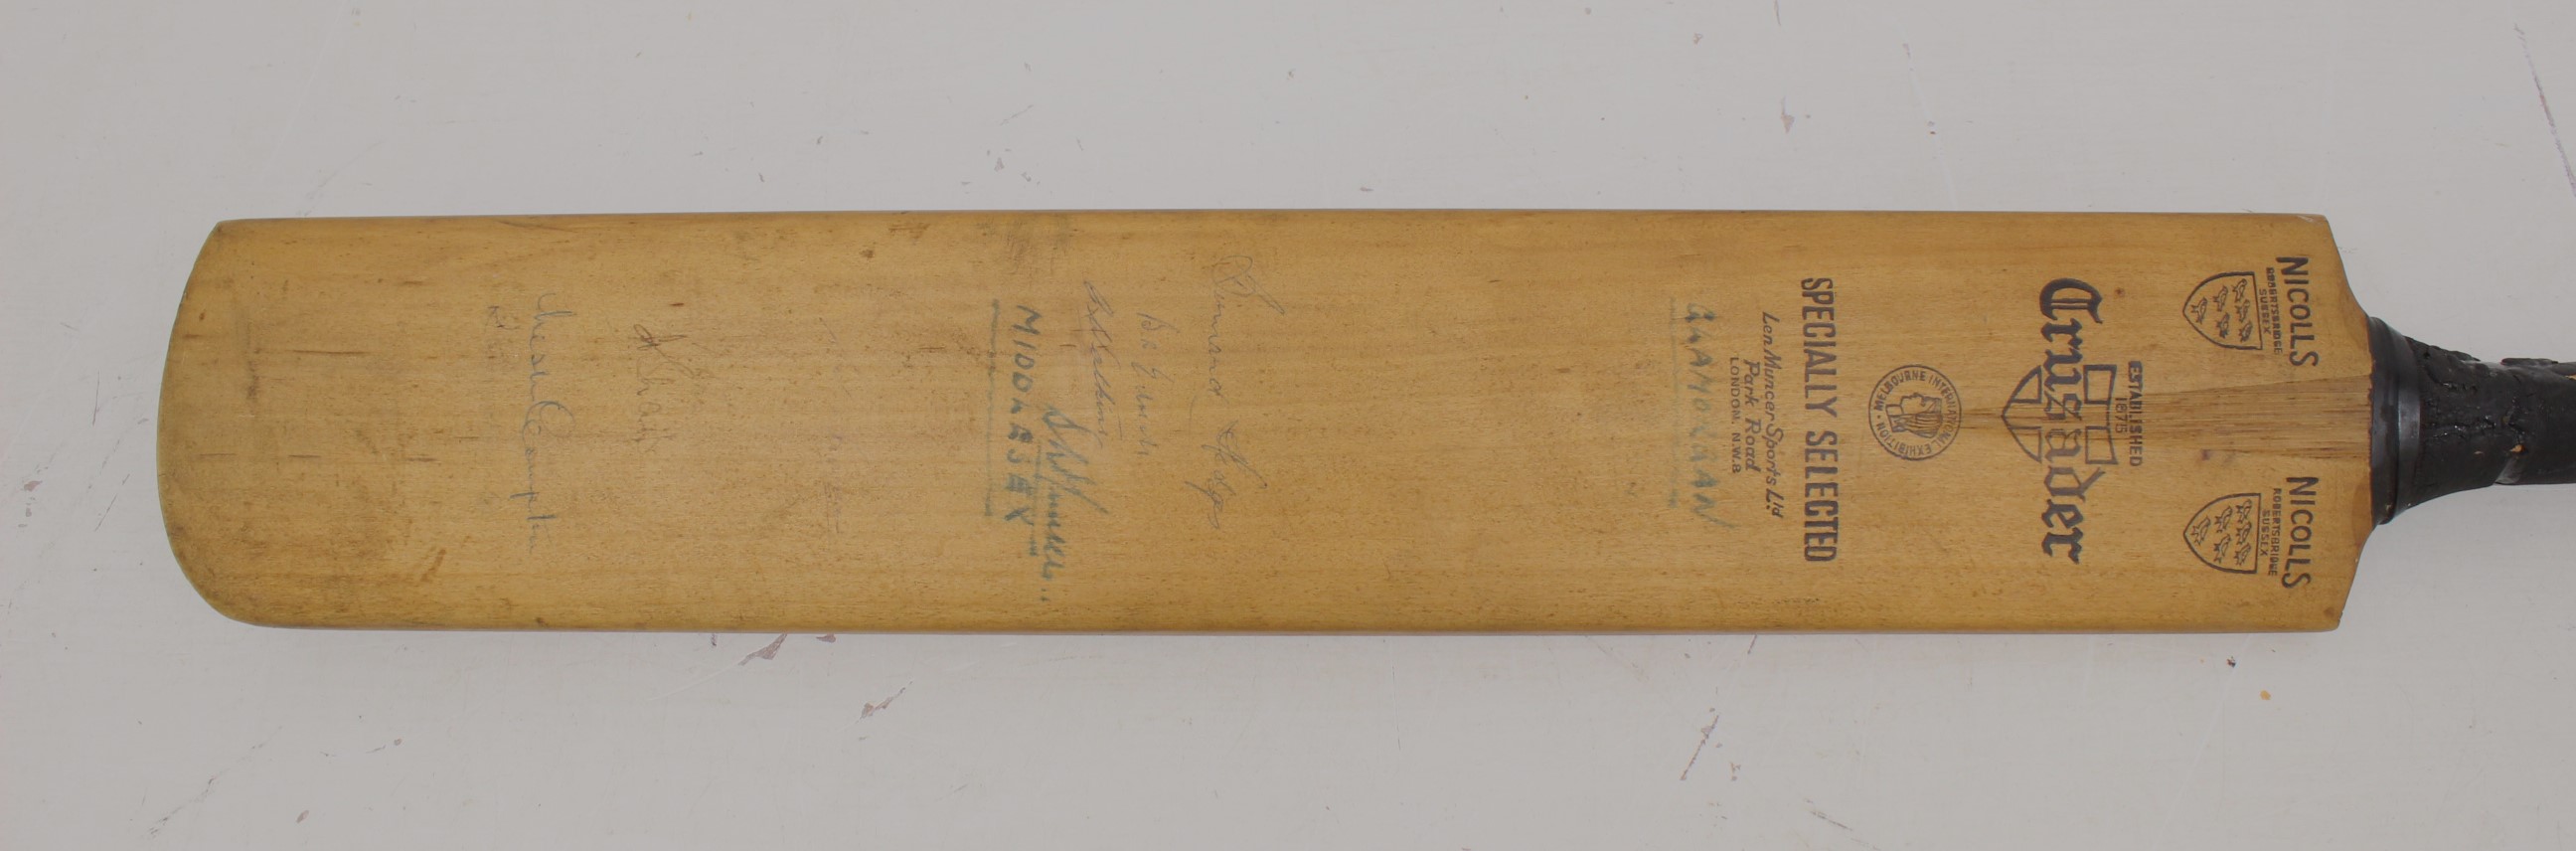 Cricket: A signed Gray-Nicolls Ltd cricket bat. Signed by a selection of 1950s cricketers - Image 3 of 3